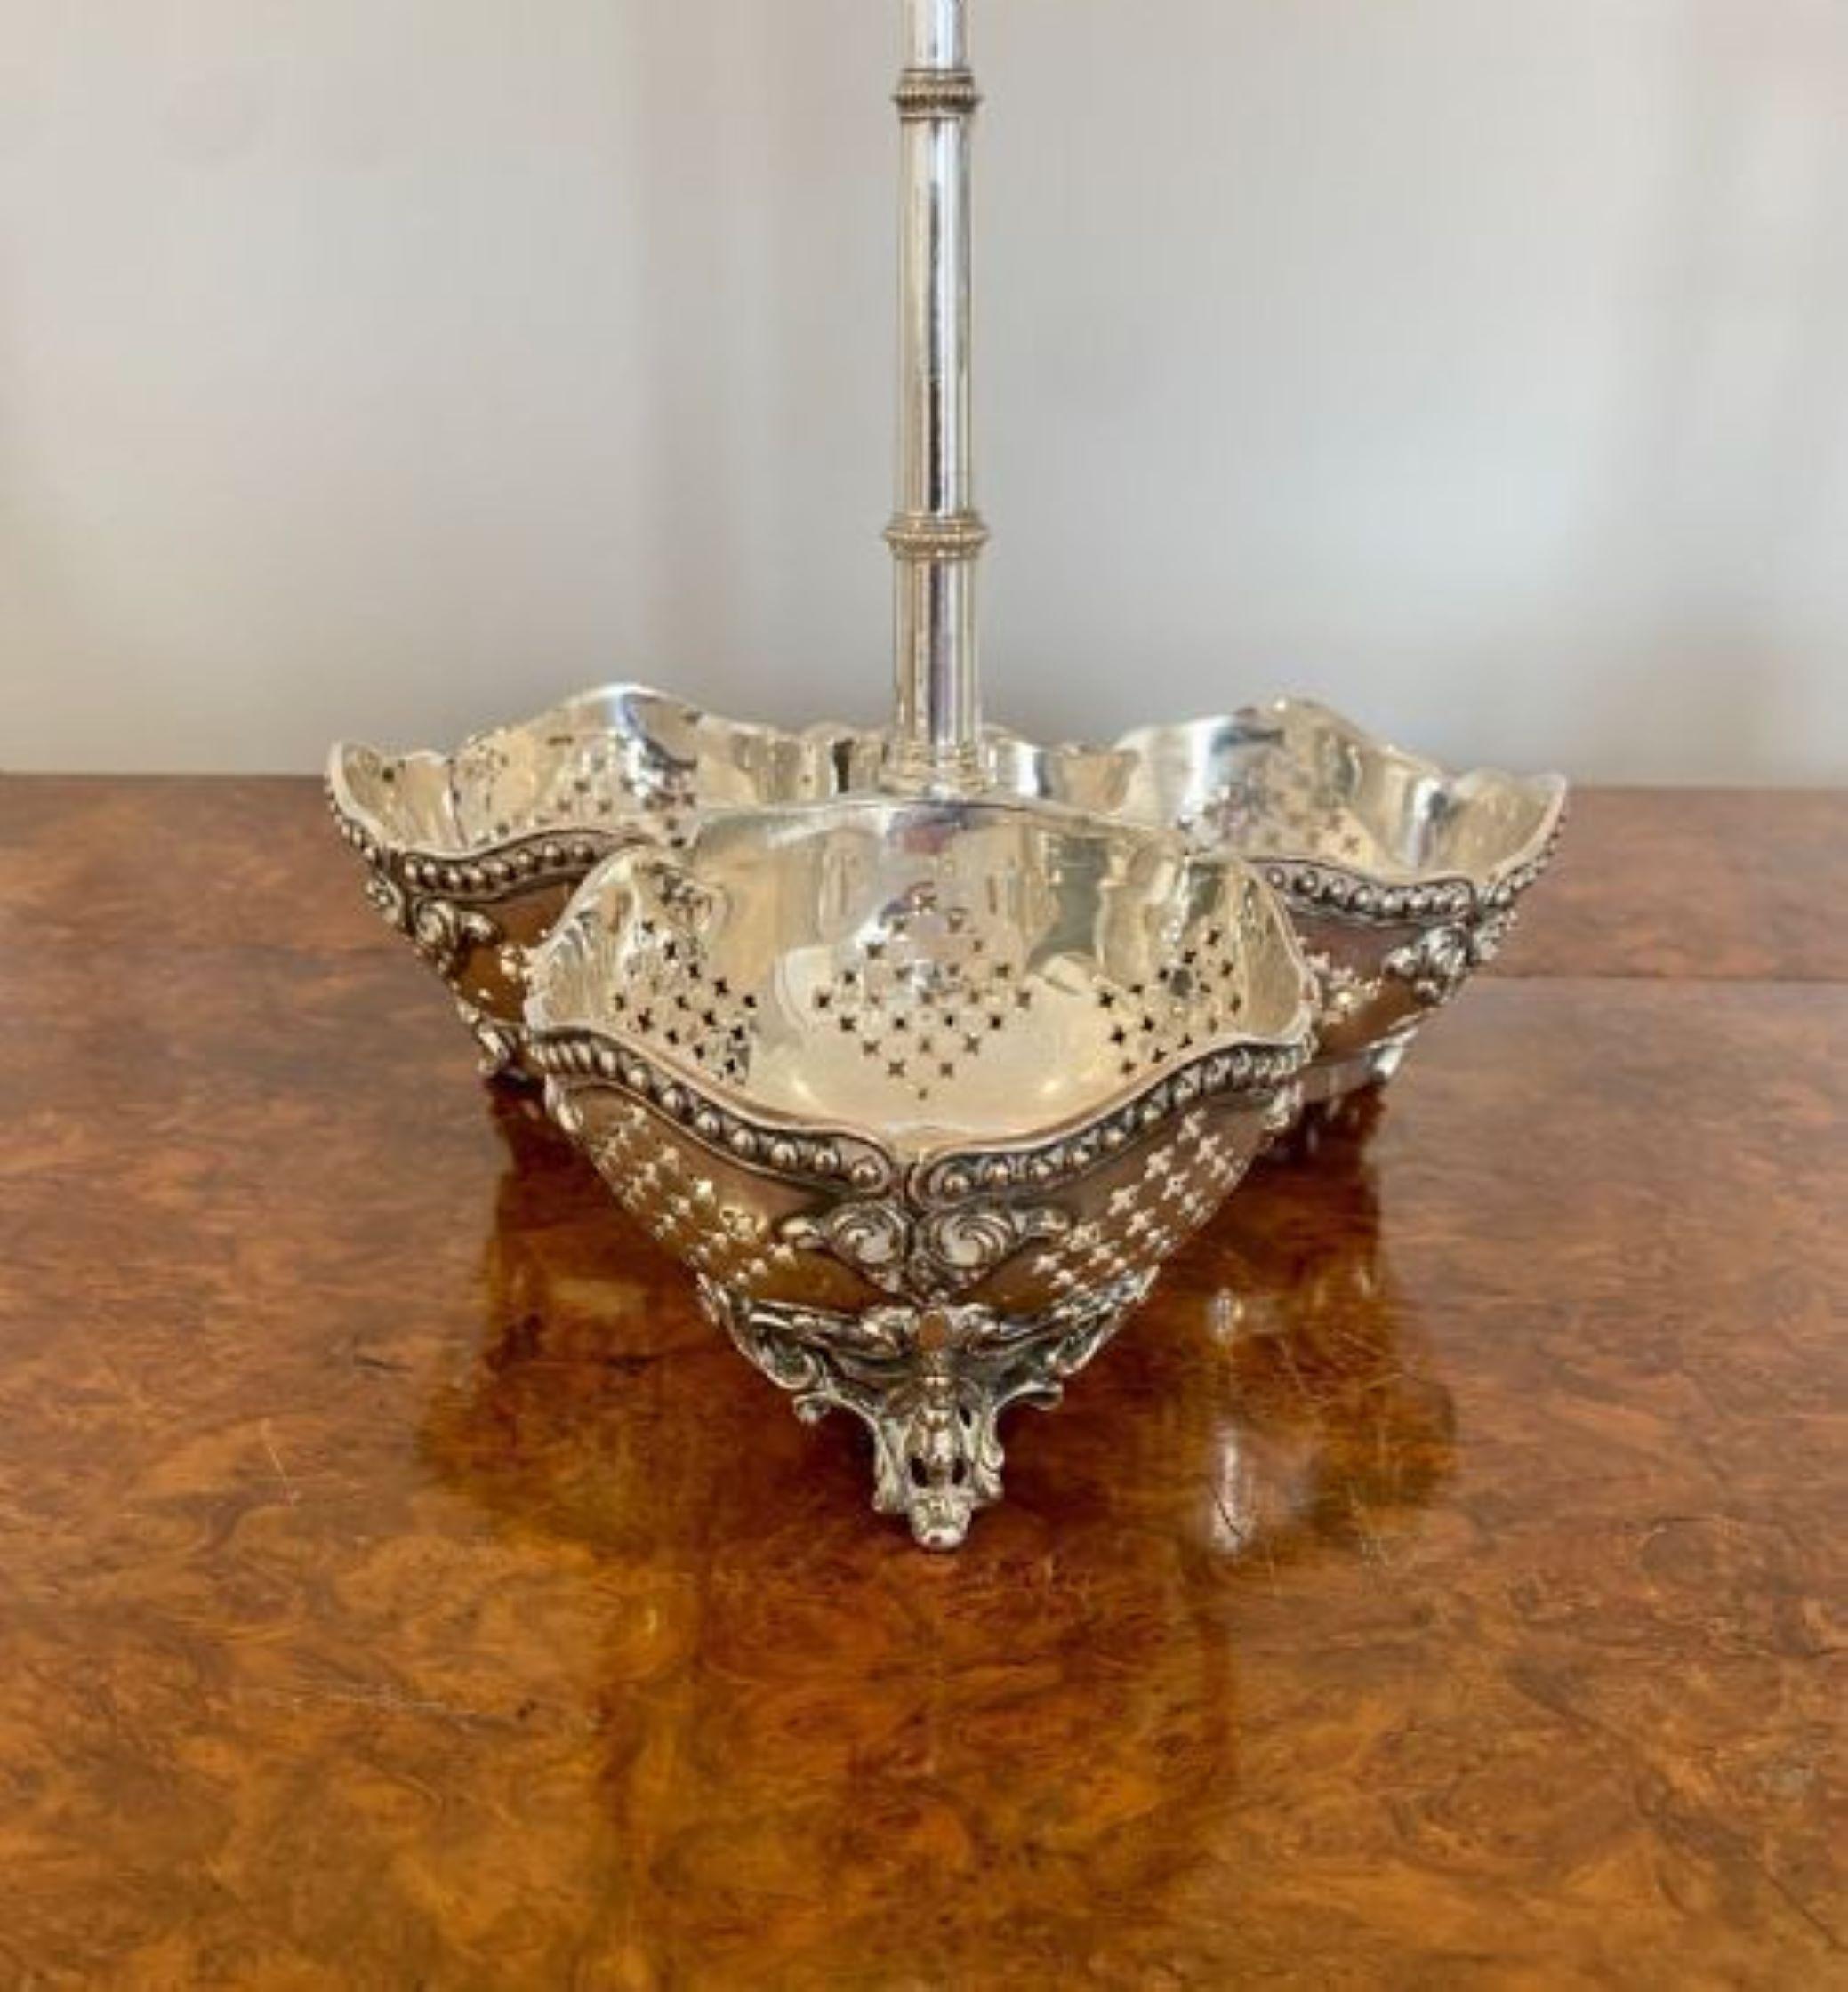 Antique 19th Century Victorian quality cut glass decanters & original silver plated stand consisting of three quality cut glass shaped decanters with three original stoppers in a quality silver plate stand, having a ornate handle and raised on